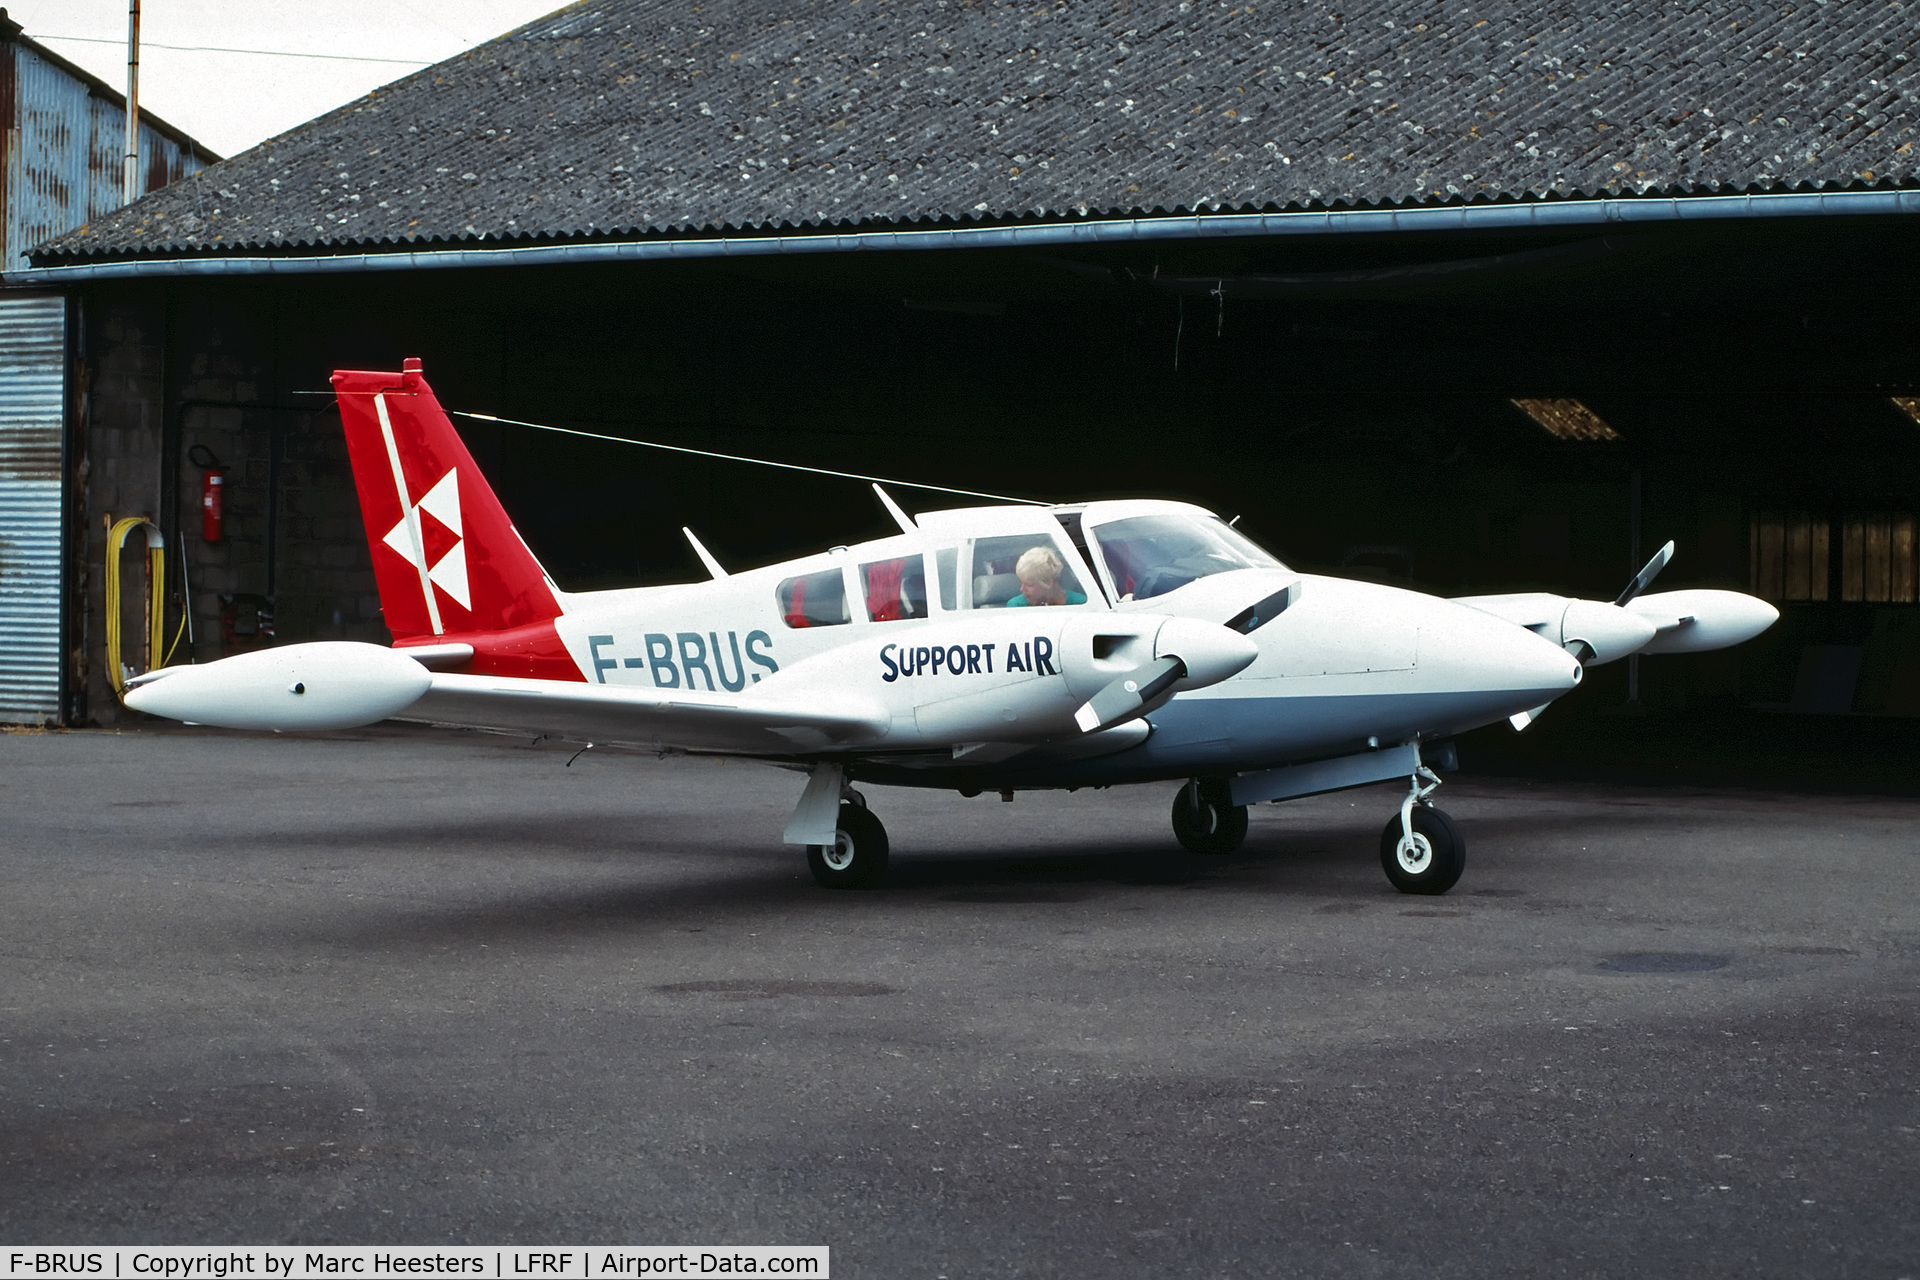 F-BRUS, 1969 Piper PA-30-160 B Twin Comanche C/N 30-1816, F-BRUS mid-July 1996 on Granville airport, France